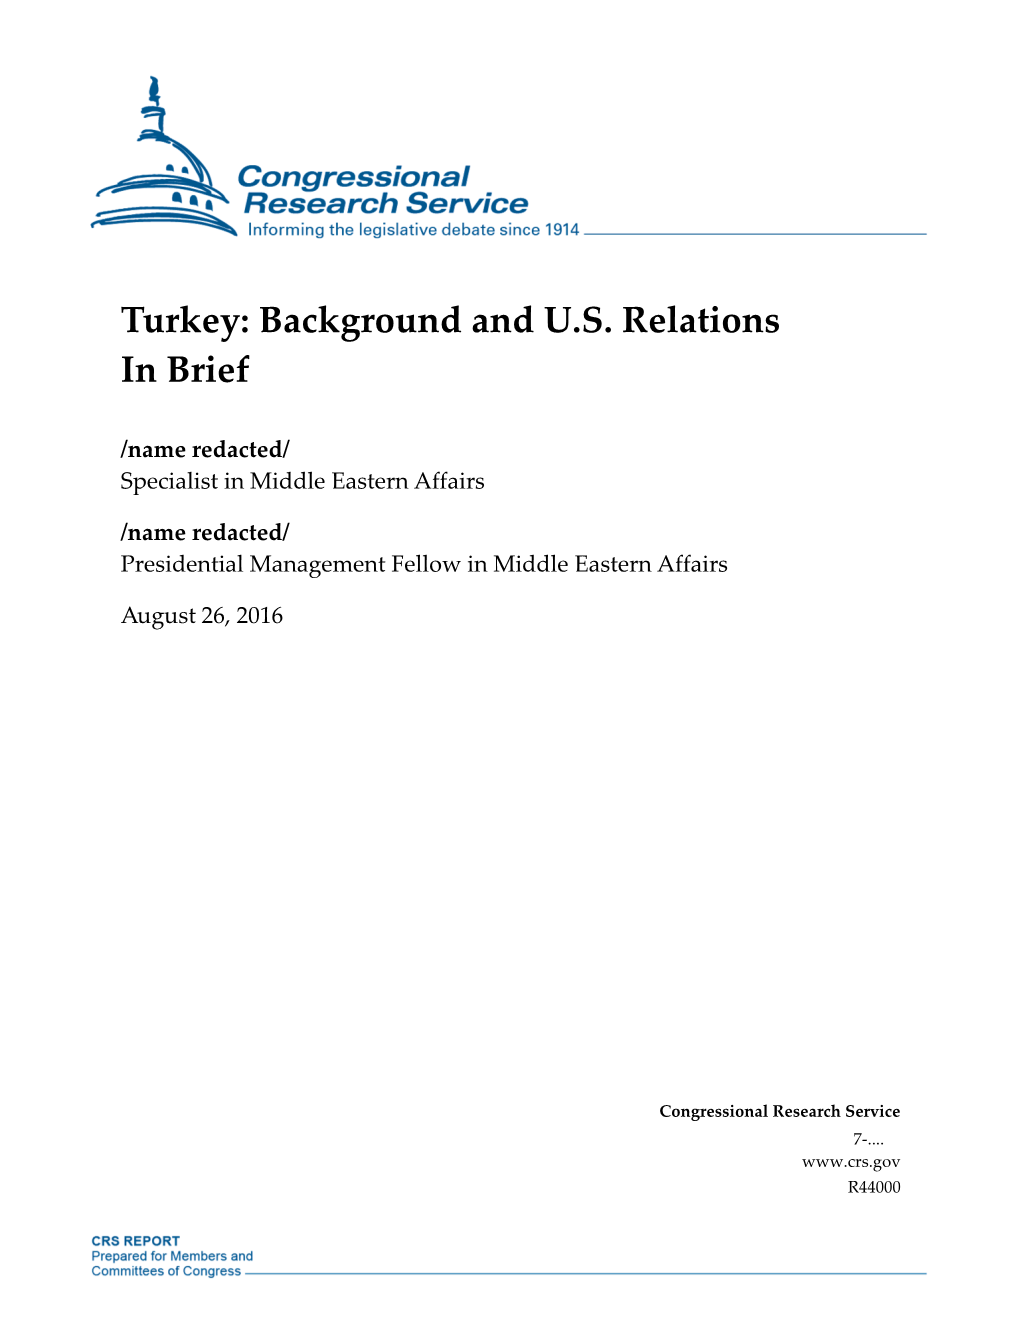 Turkey: Background and US Relations in Brief